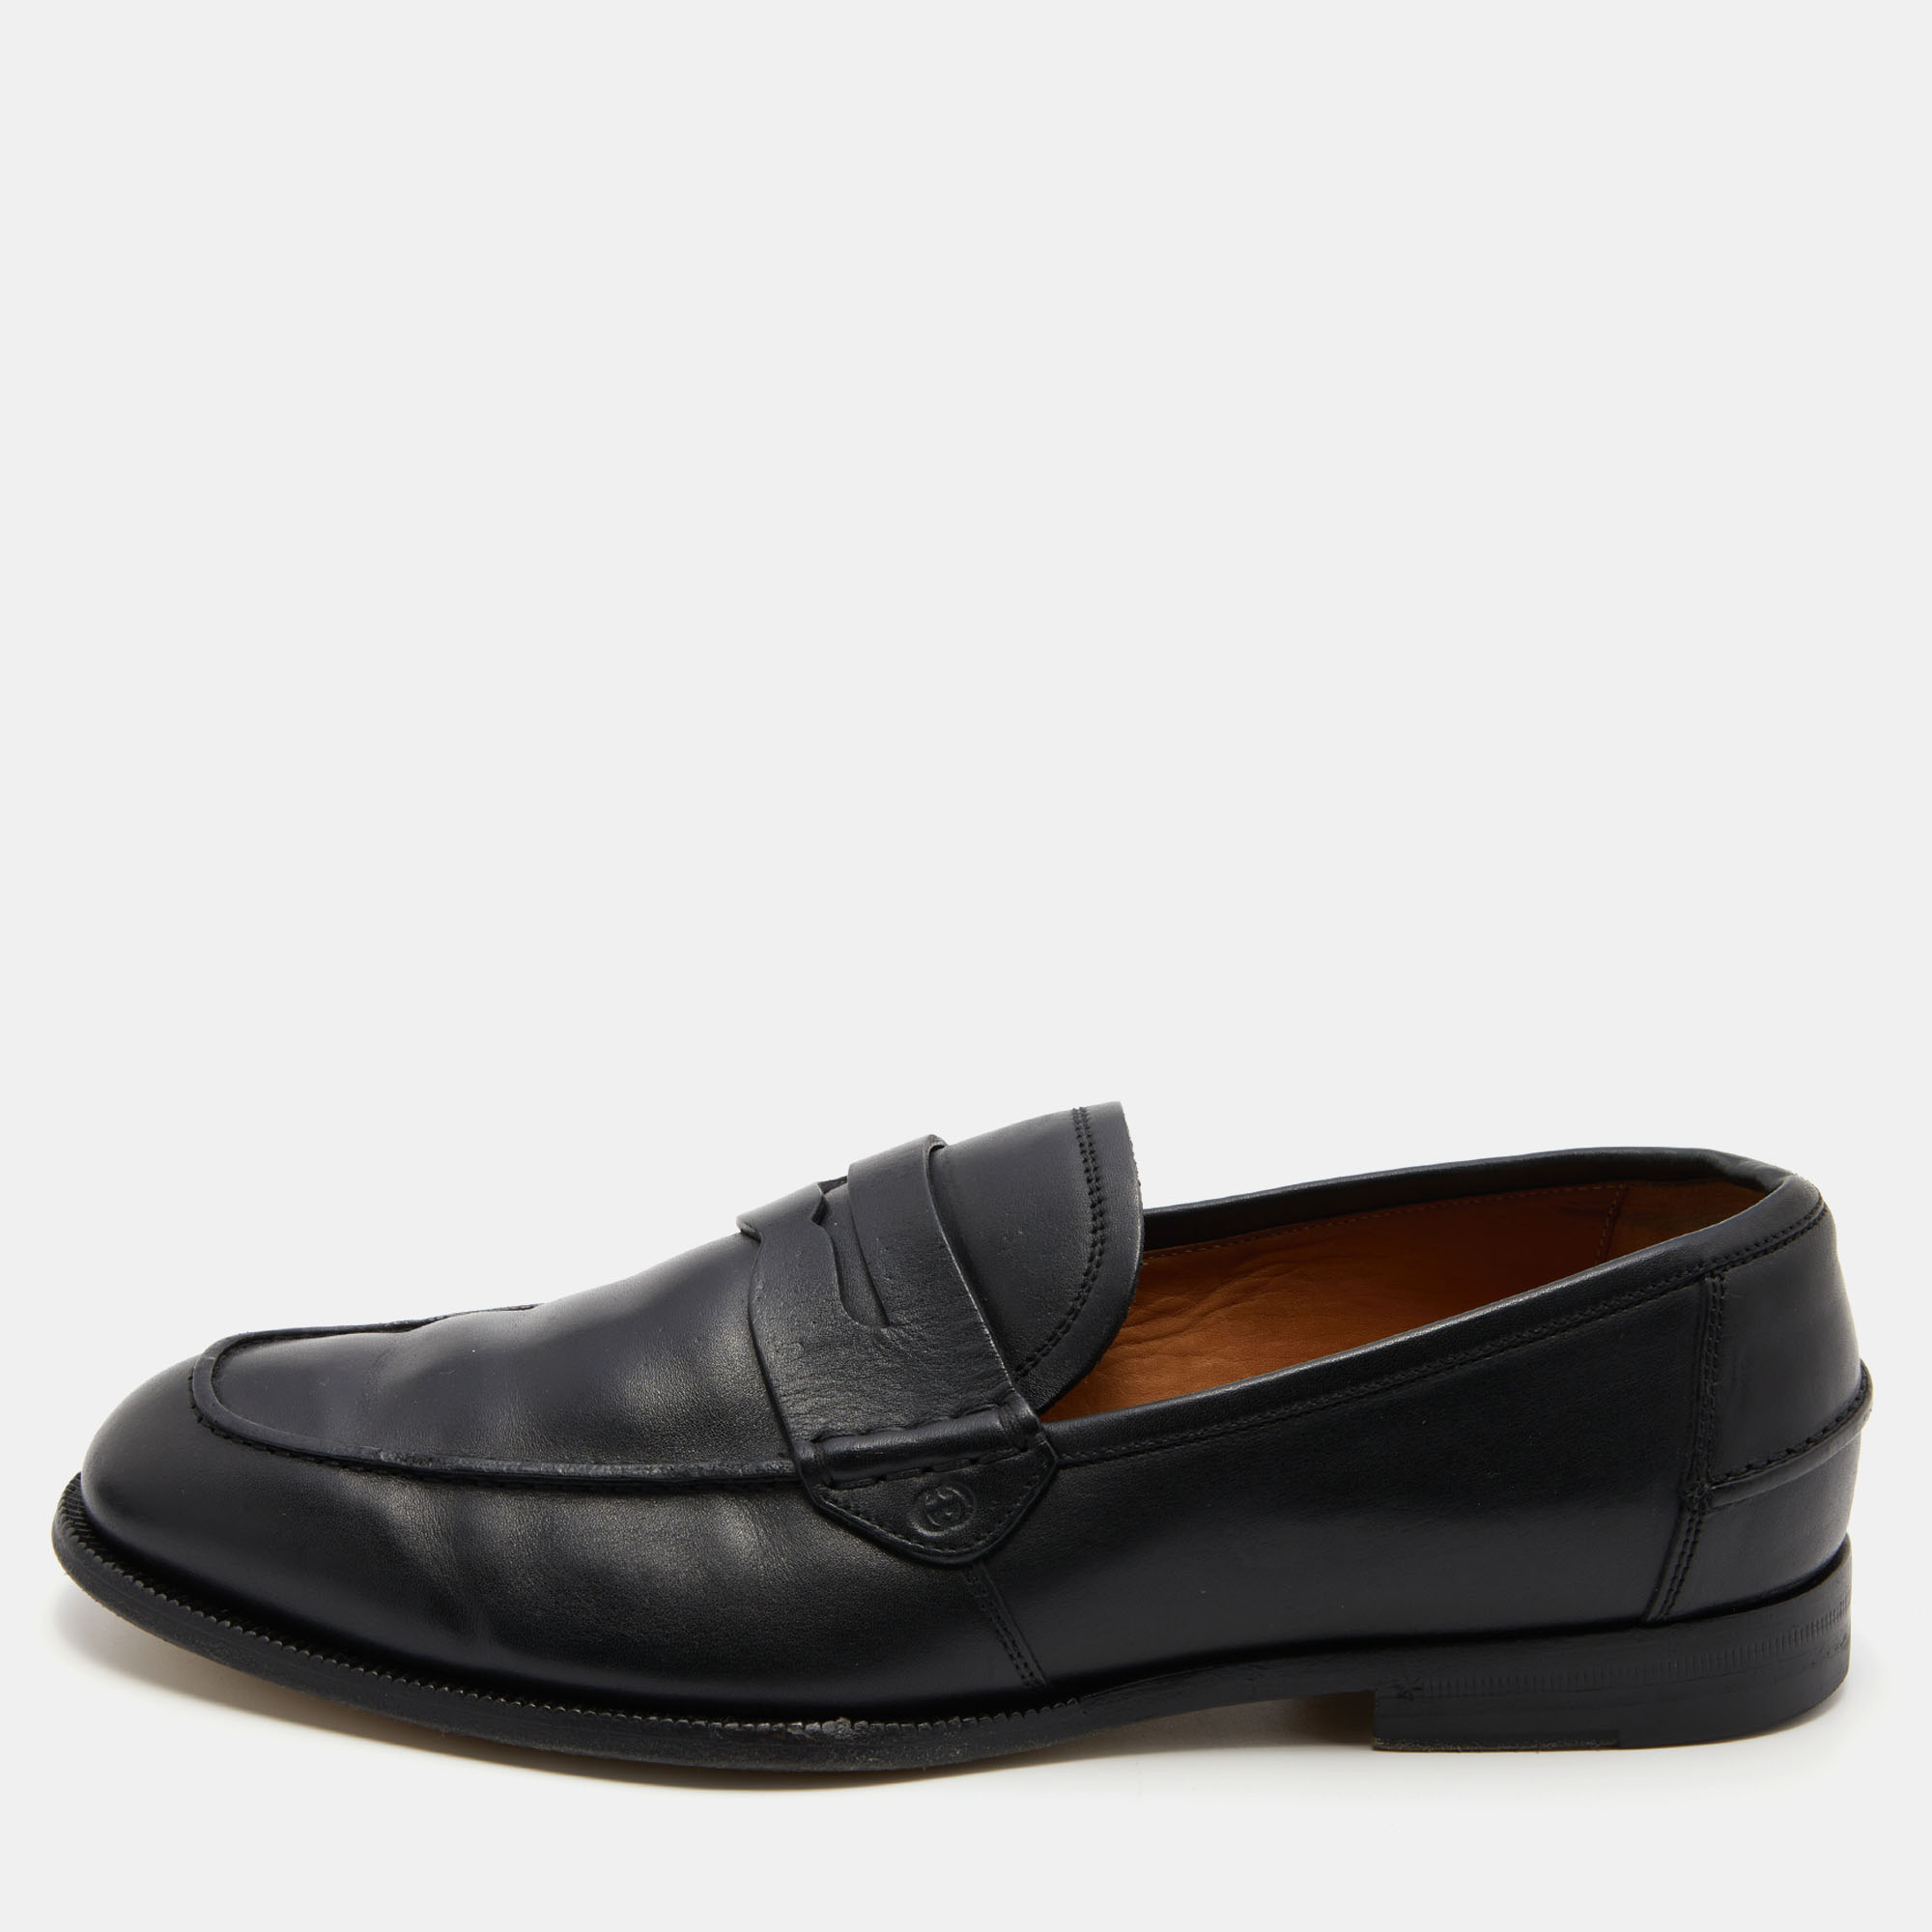 

Gucci Black Leather Slip On Penny Loafers Size